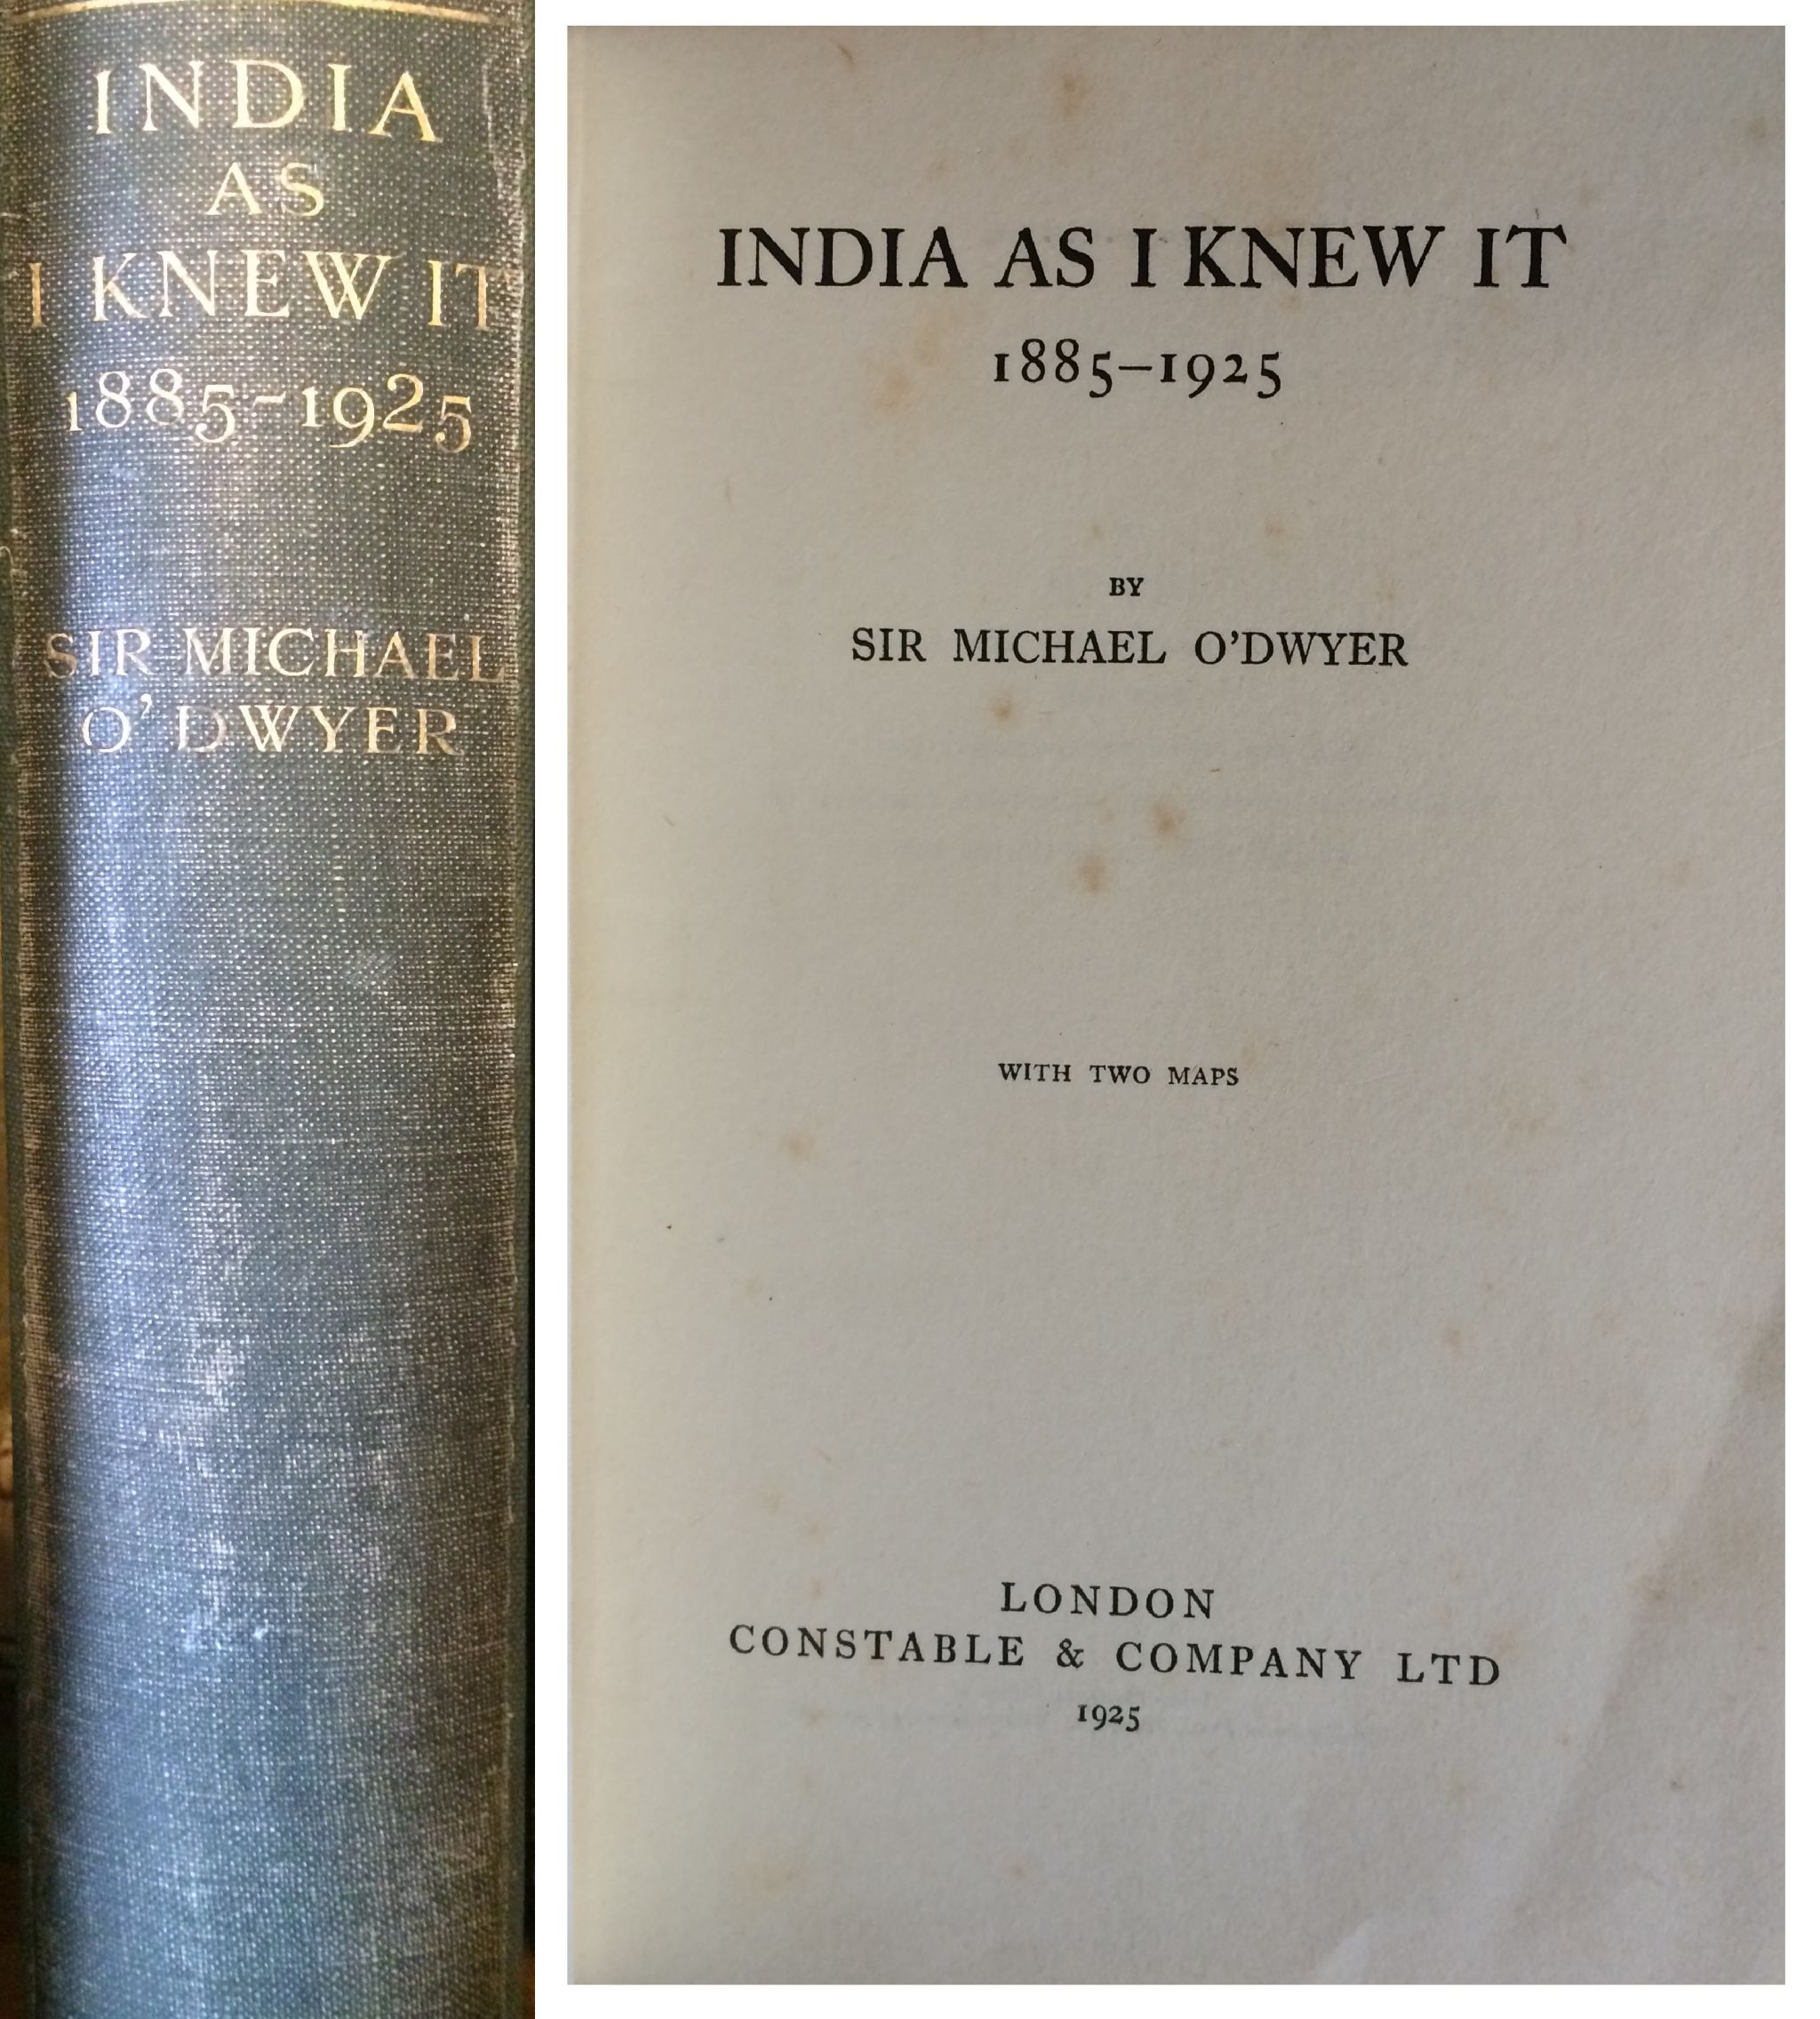 INDIA - SIR MICHAEL O`DWYER & THE AMRITSAR MASSACRE - India as I knew it 1885- 1925, by Sir